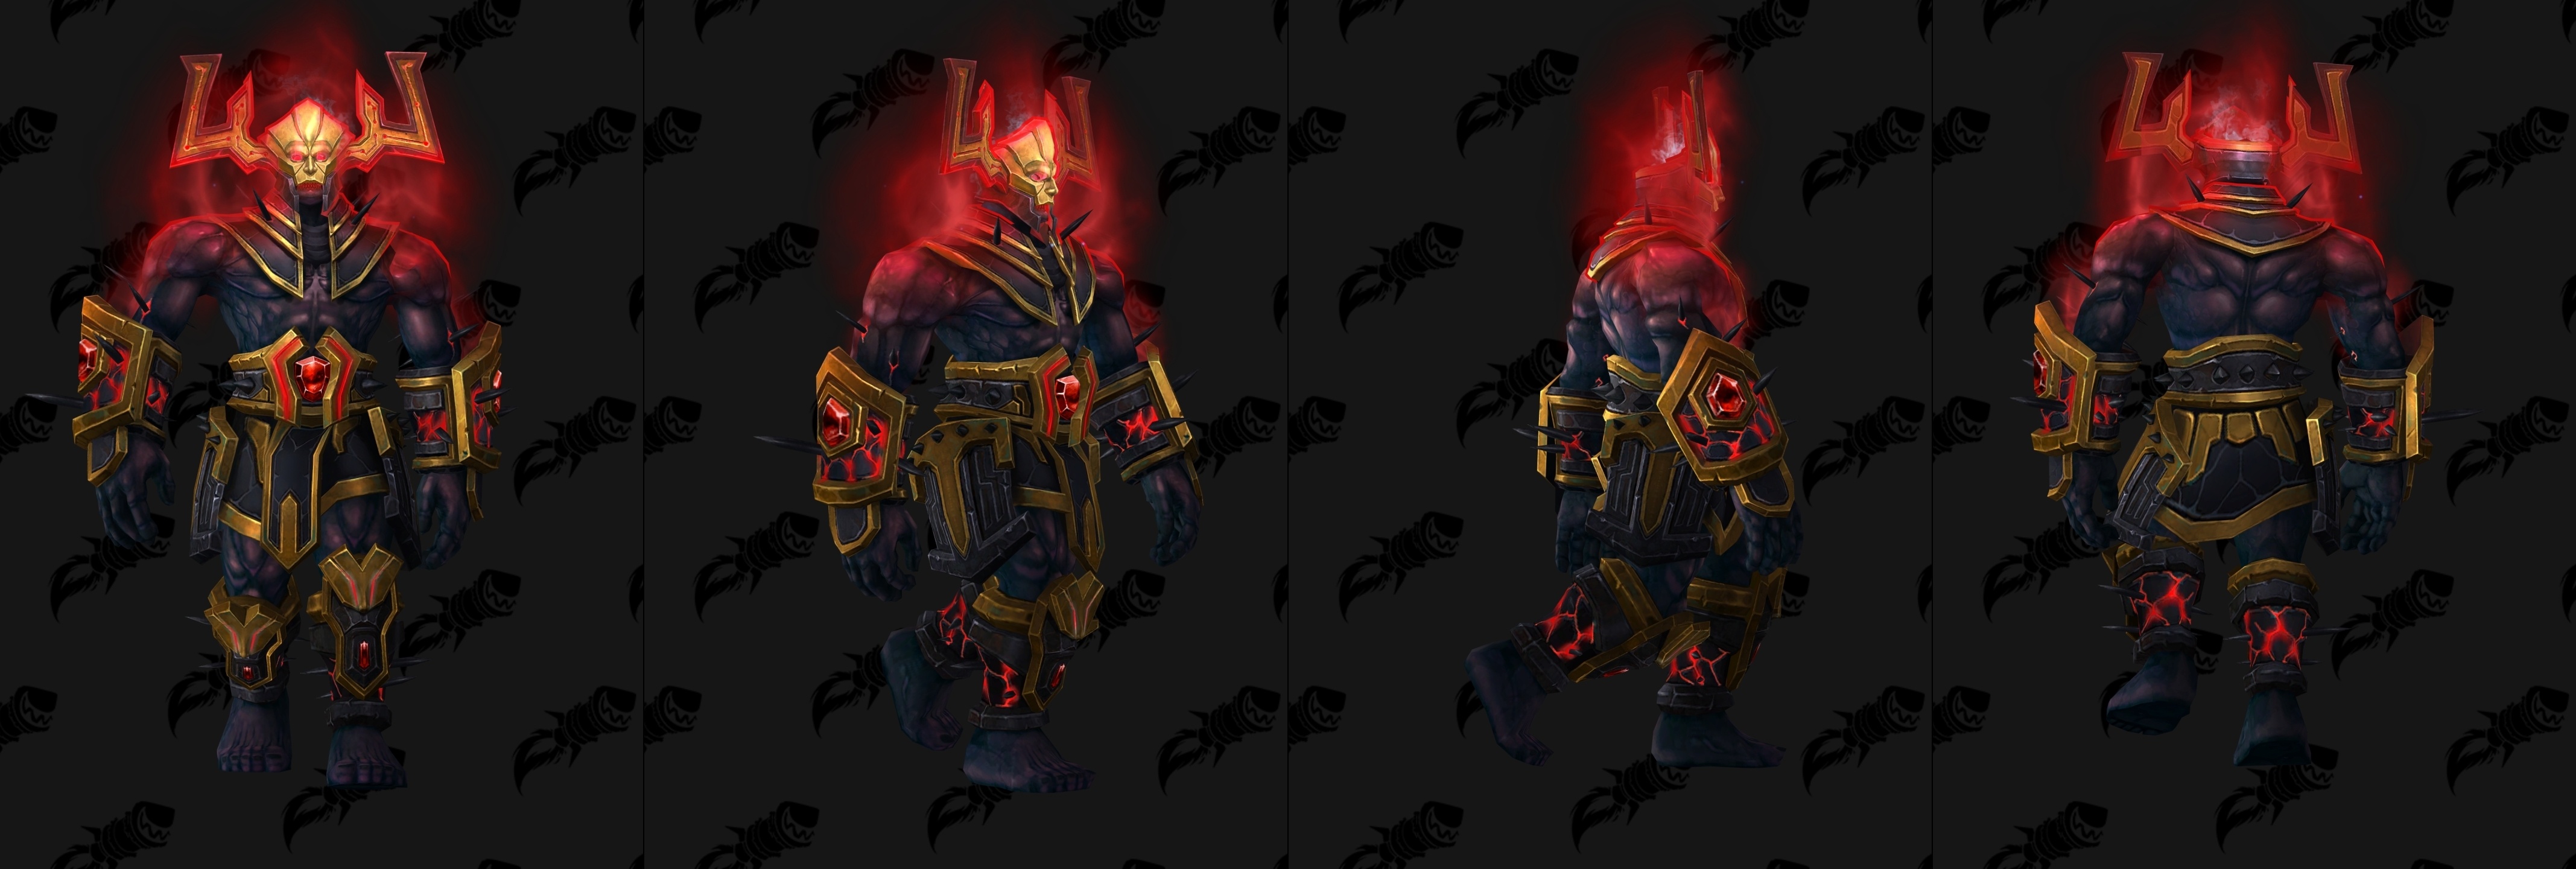 Myre T Sprede Argus the Unmaker: What We Know About the Final Boss for Antorus - Wowhead  News